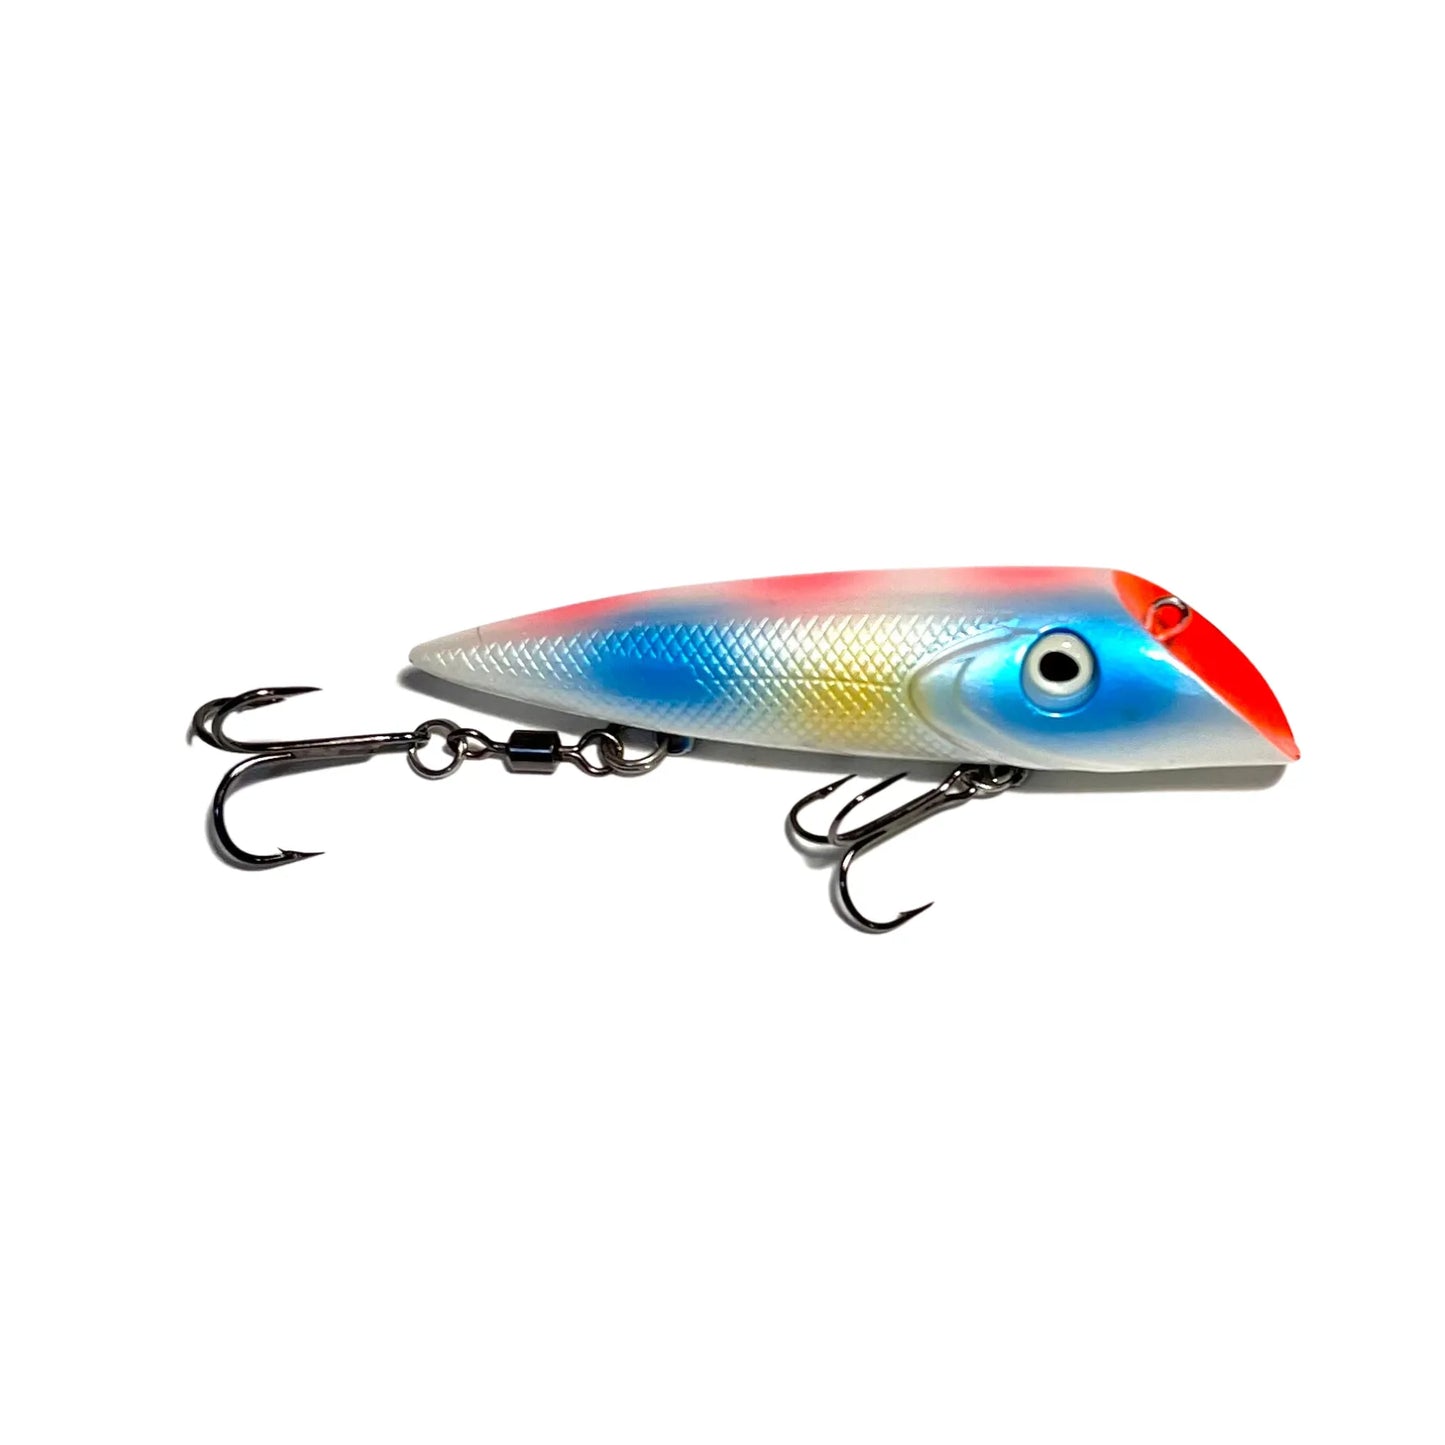 GiftGuide: Lyman's Lures Tradition of hand-painted wooden lures continues  in Canada